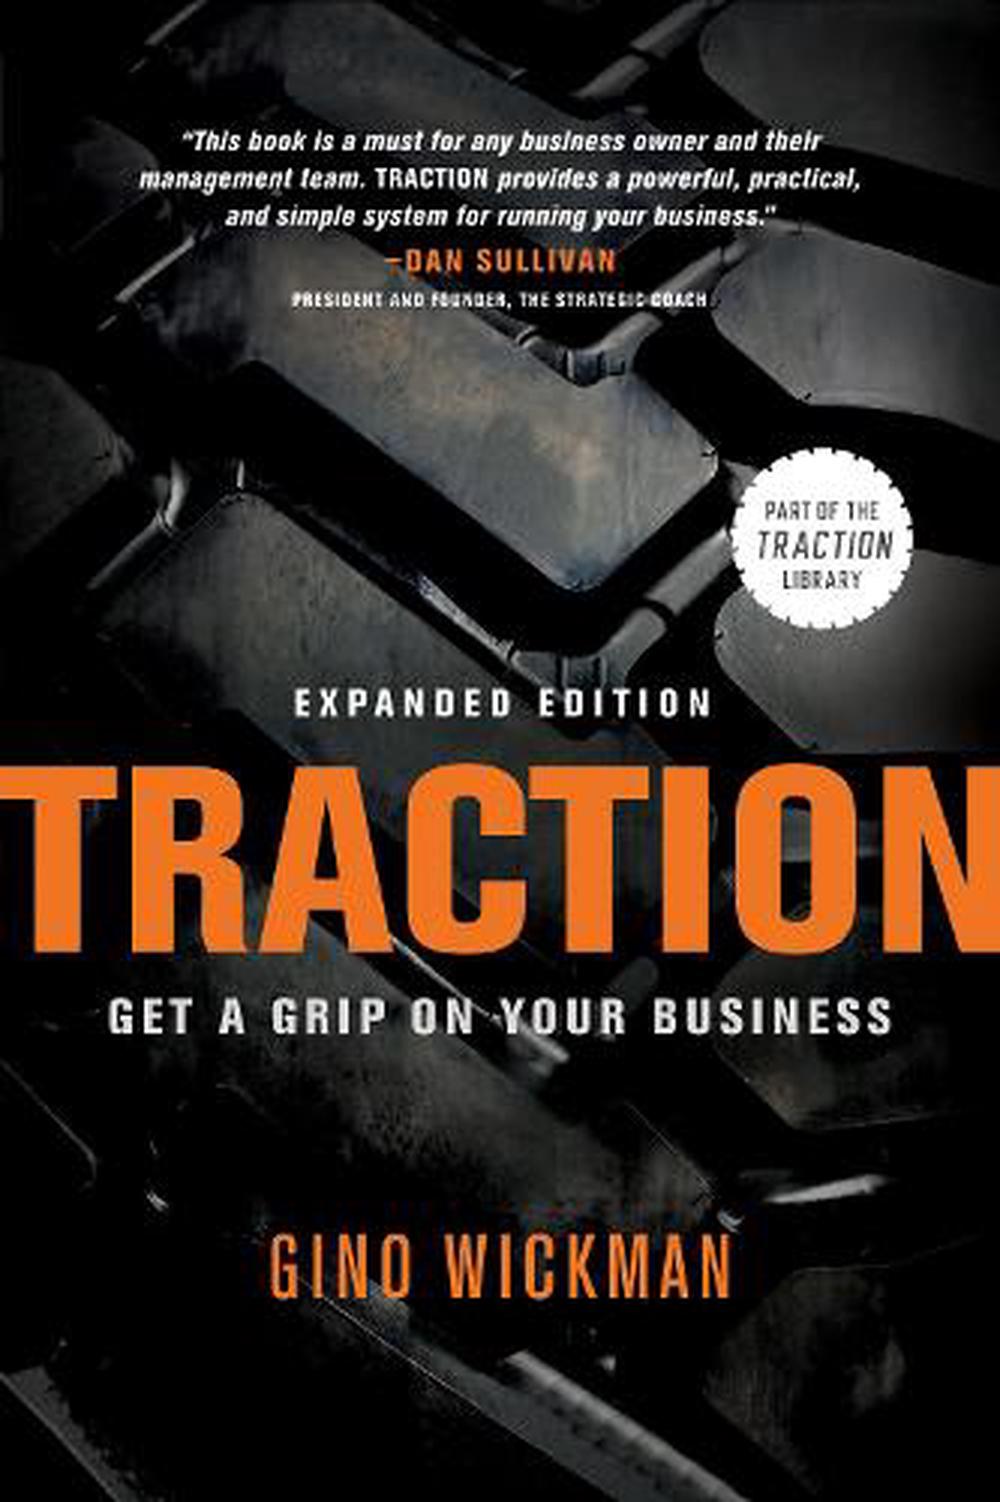 traction gino wickman pdf download